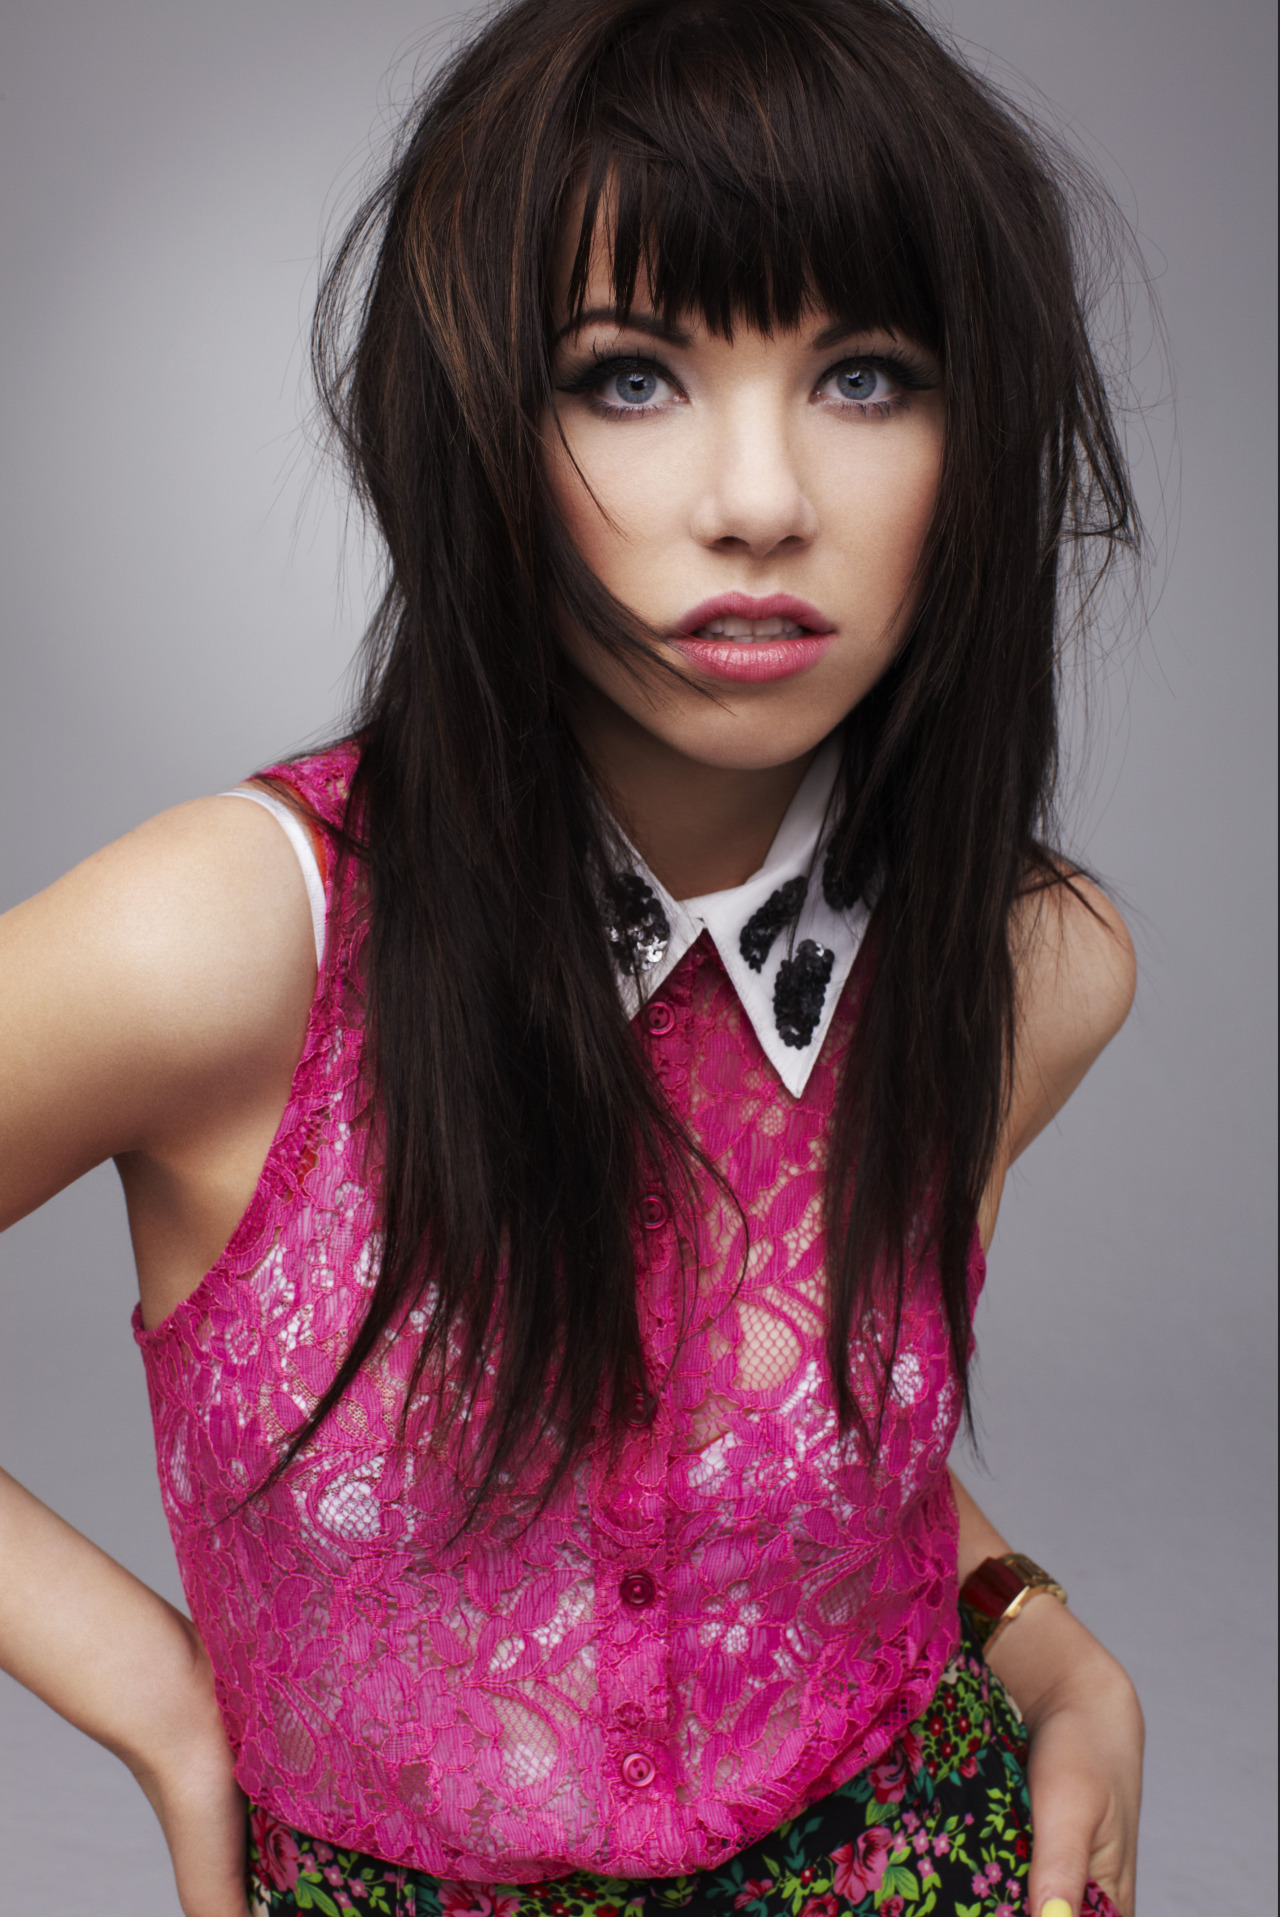 Picture Of Carly Rae Jepsen In General Pictures Carly Rae Jepsen 1426529589 Teen Idols 4 You